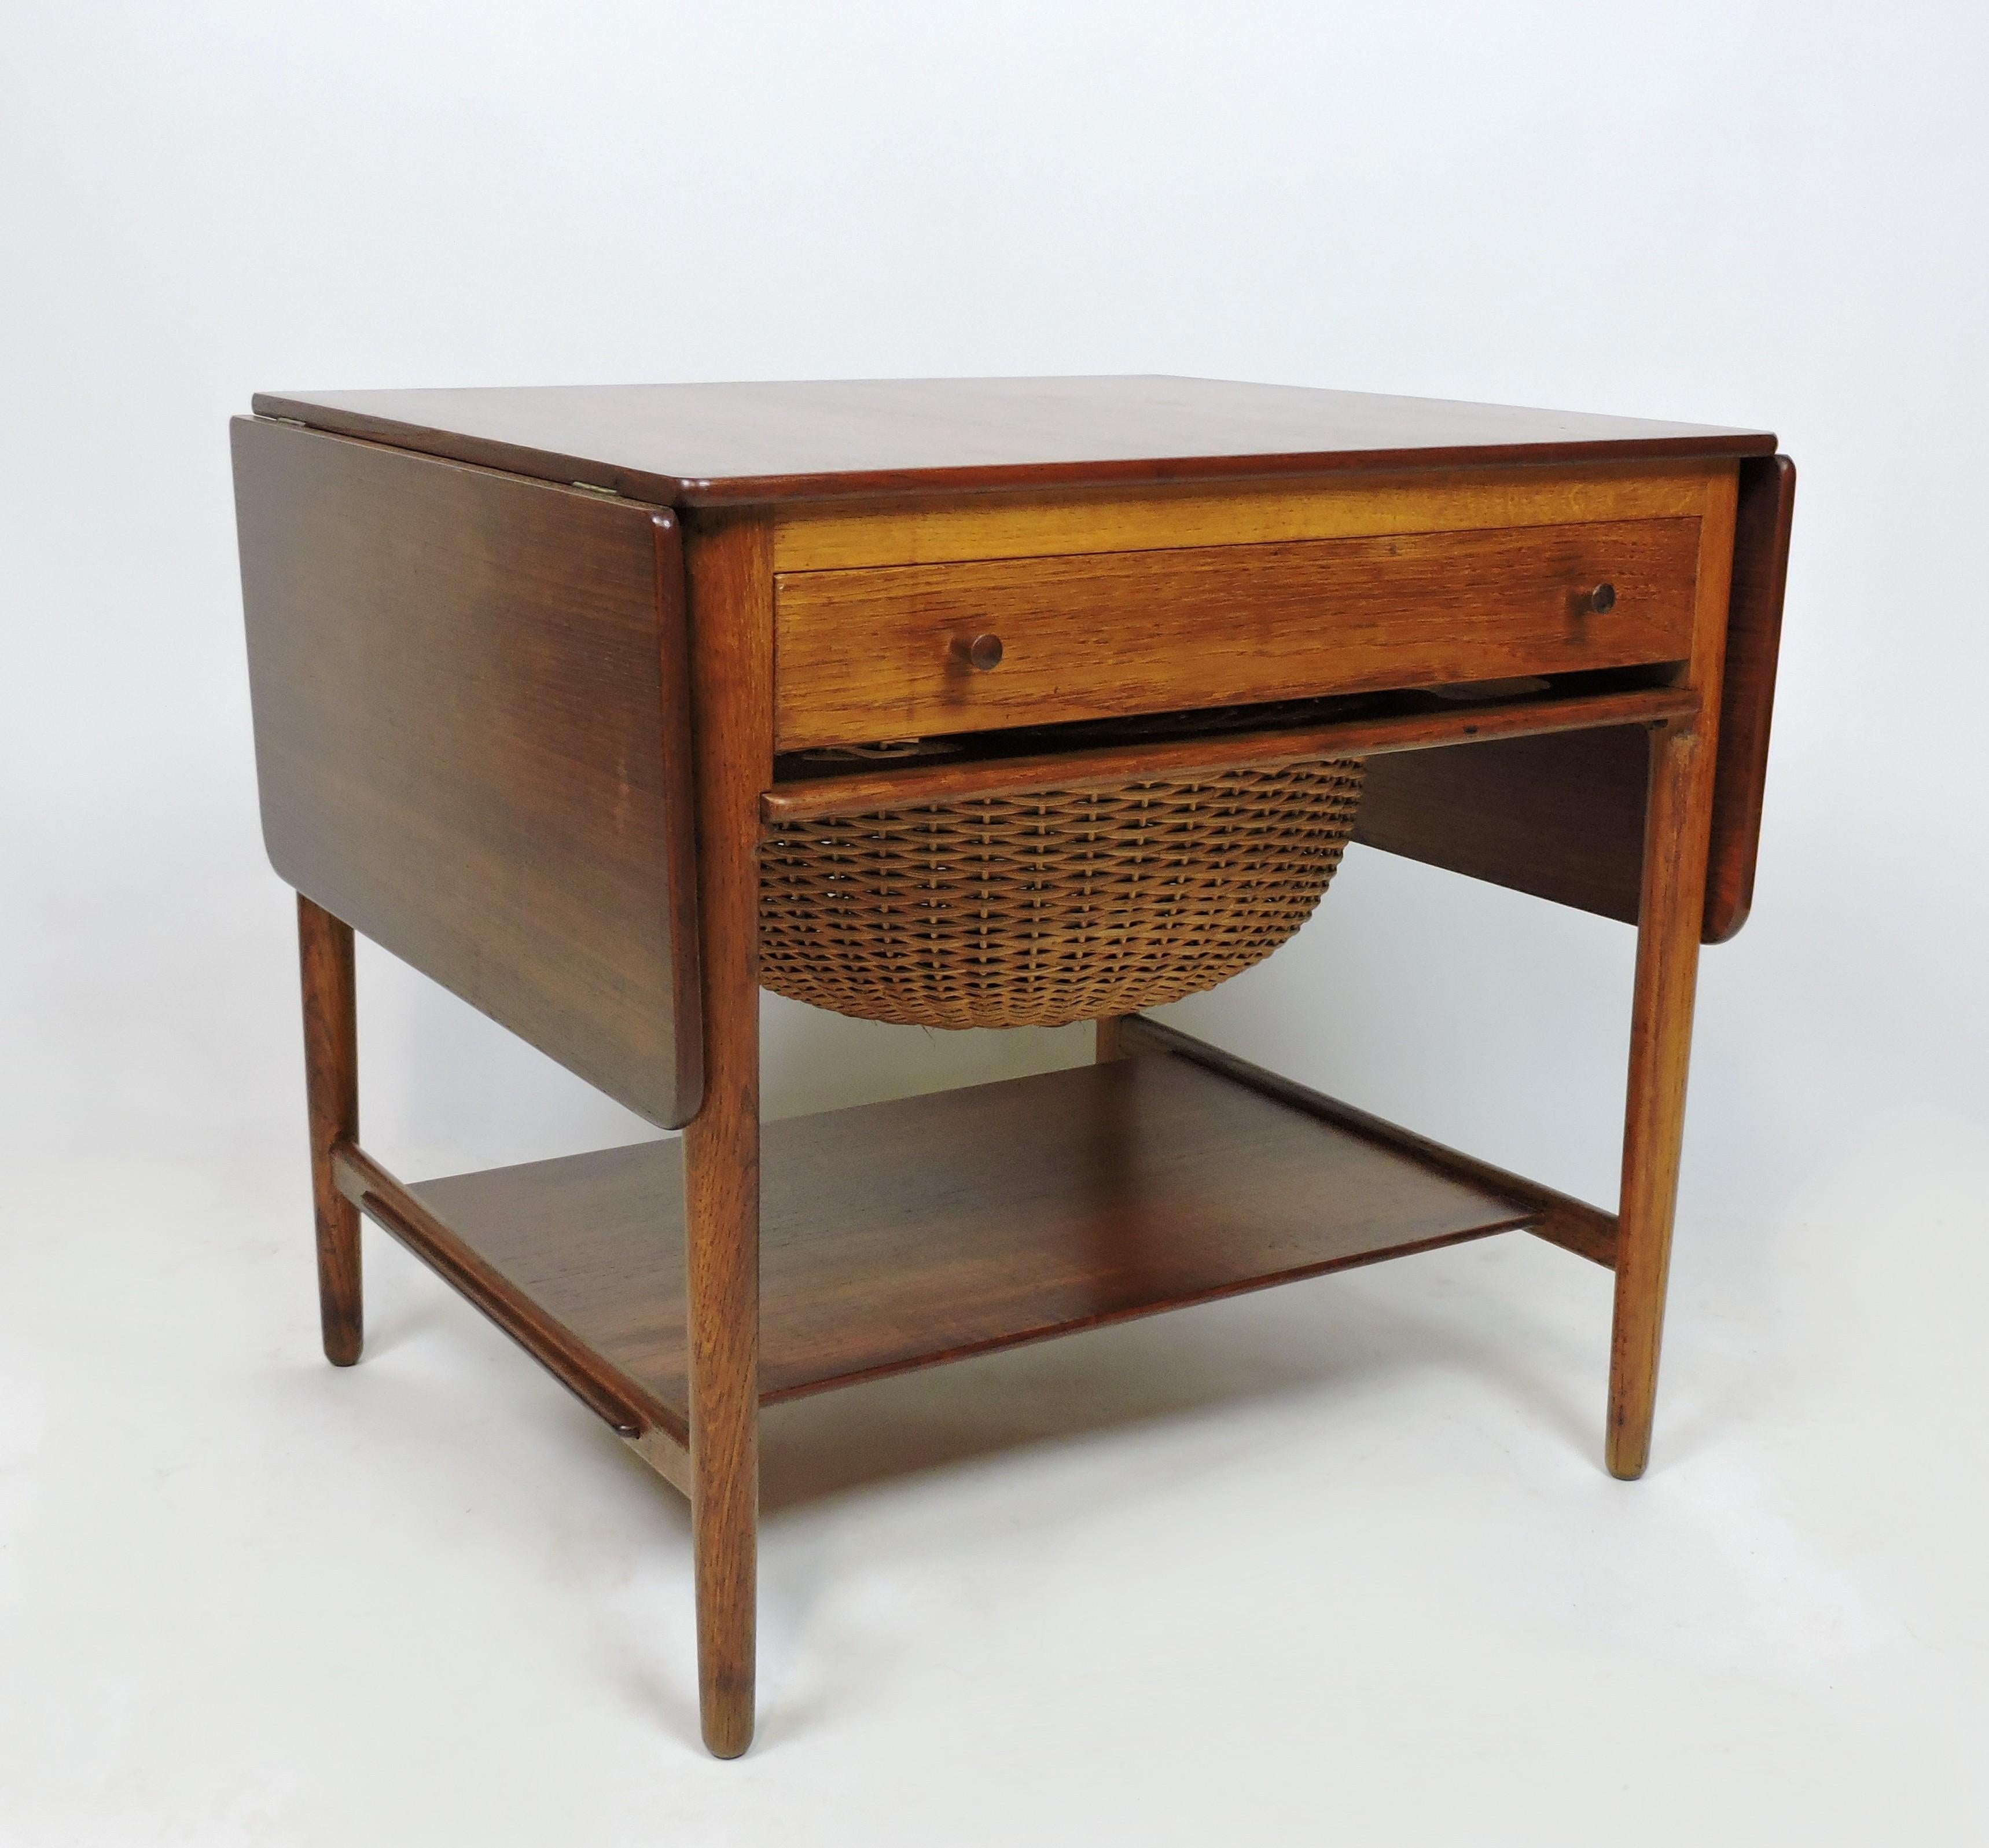 Hans Wegner Danish Modern AT-33 Teak and Oak Sewing Table for Andreas Tuck In Good Condition For Sale In Chesterfield, NJ